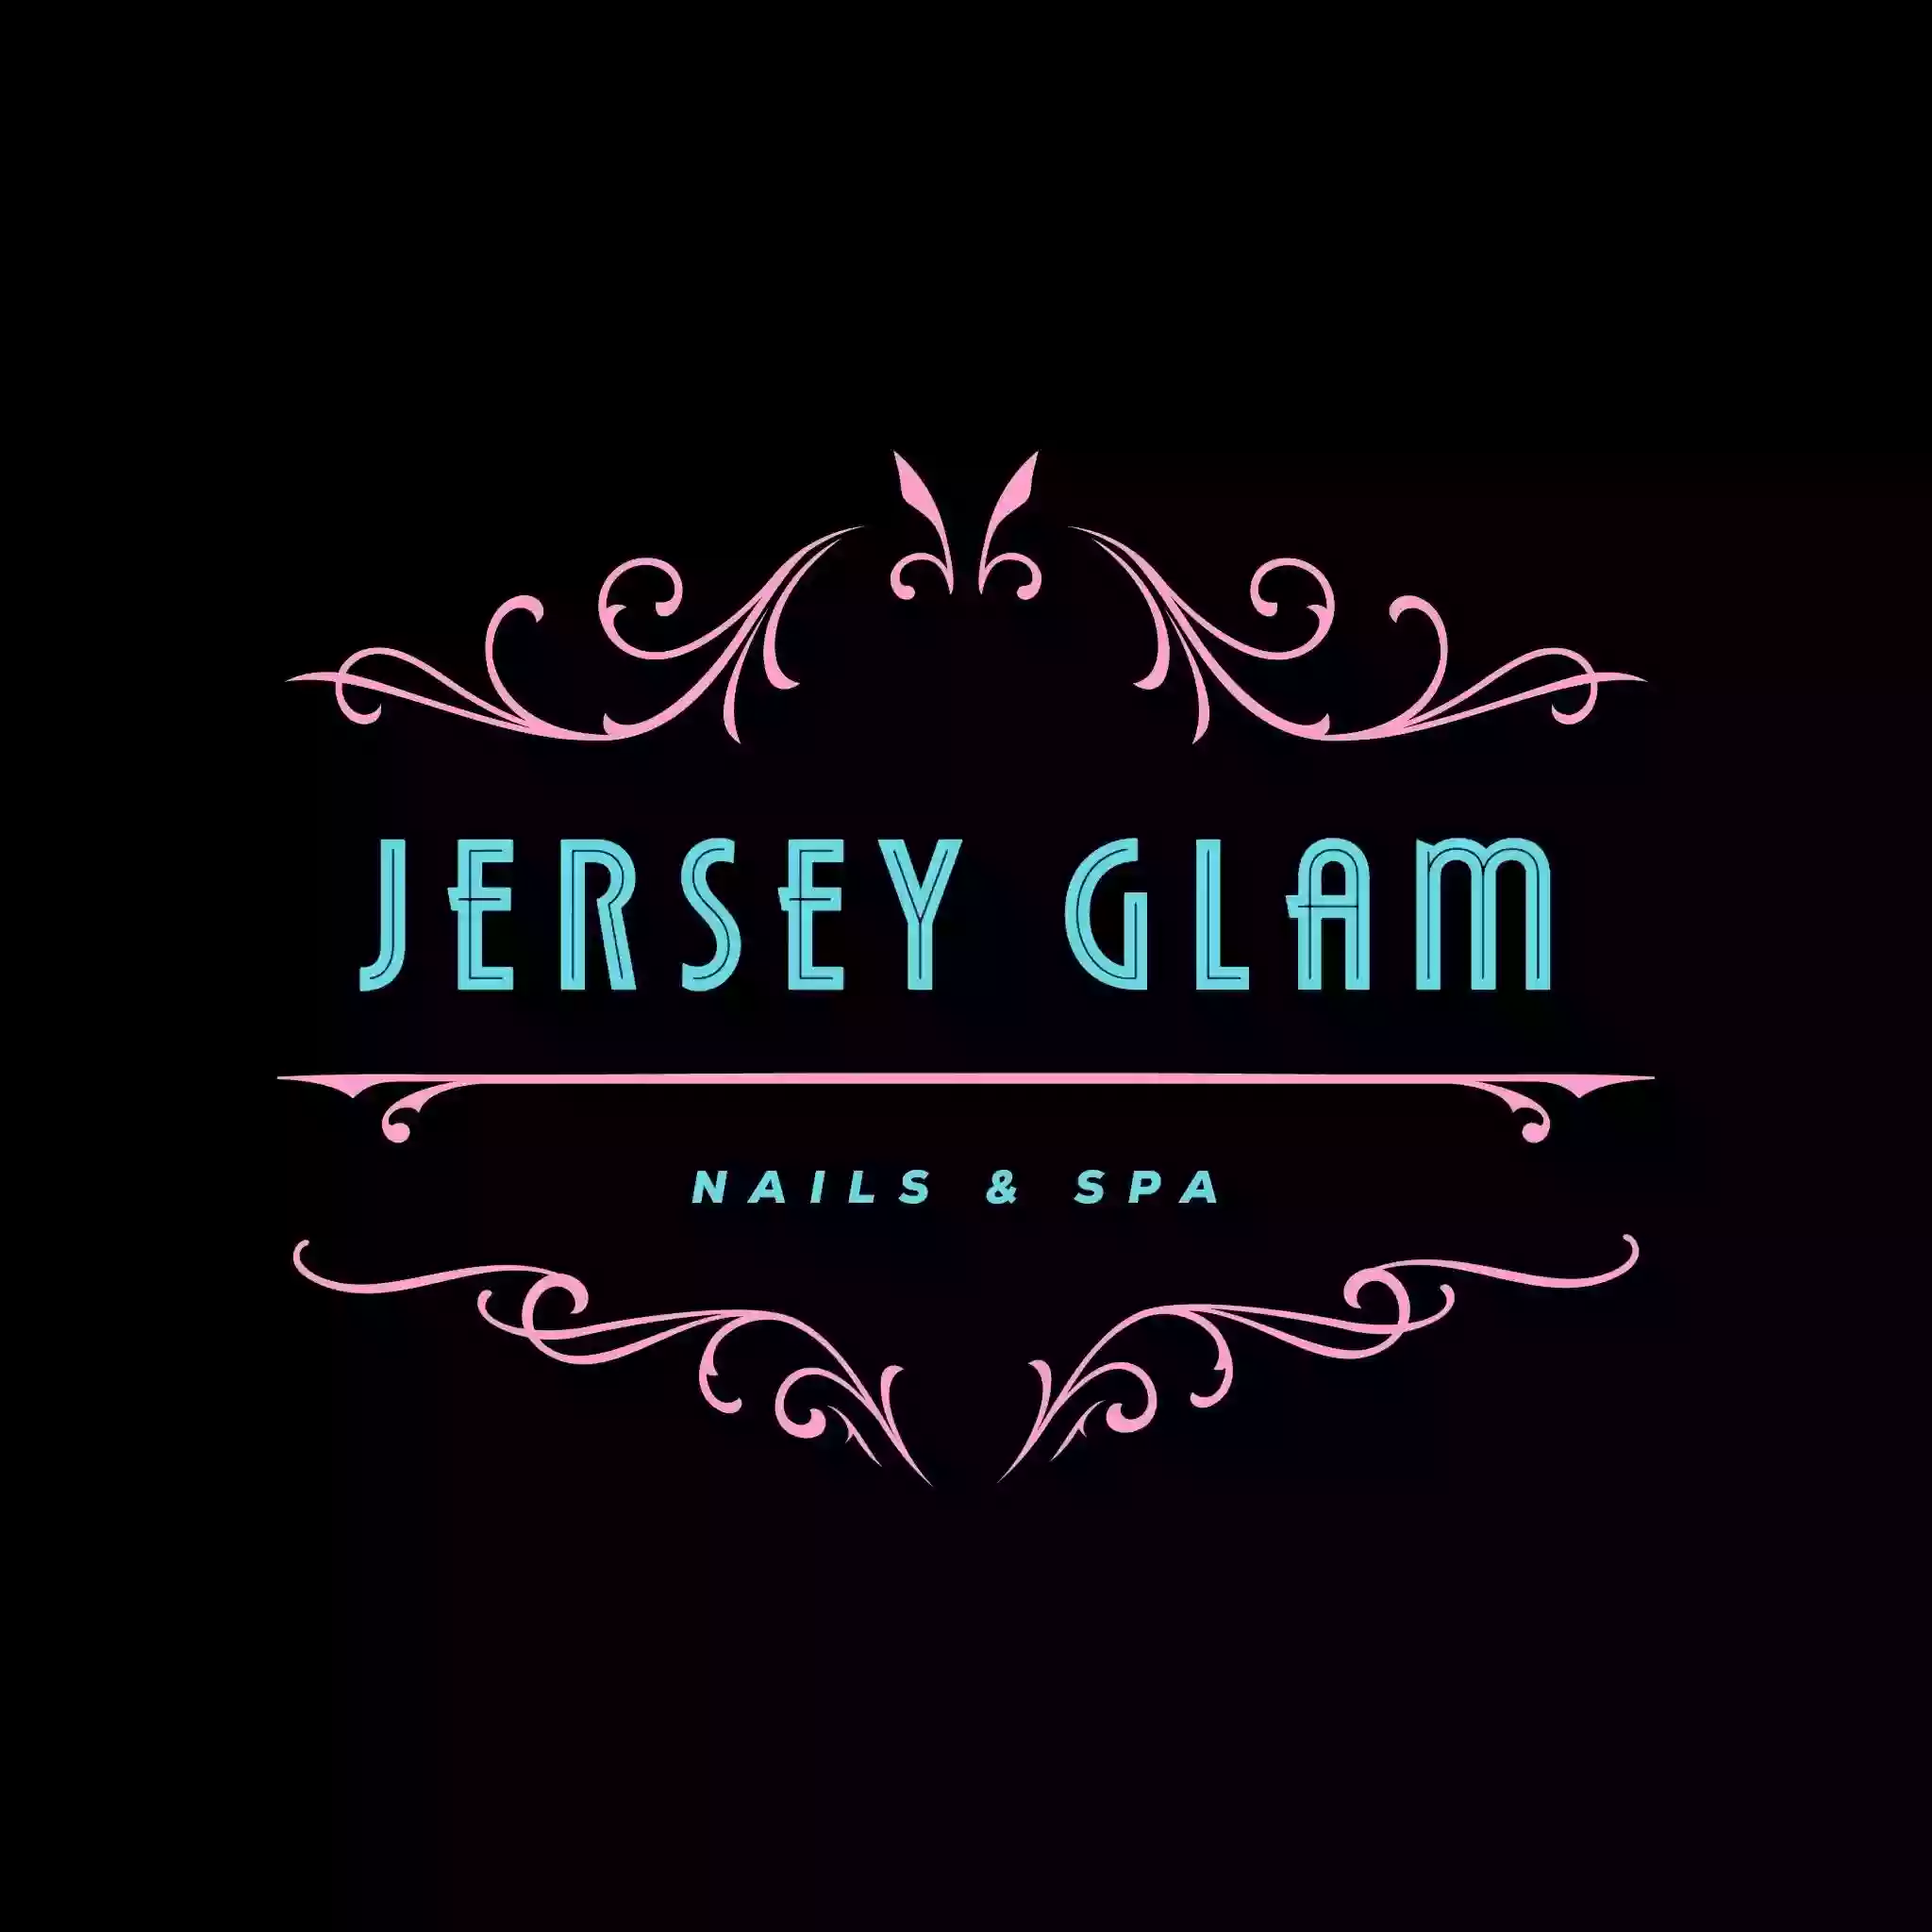 Jersey Glam Nails